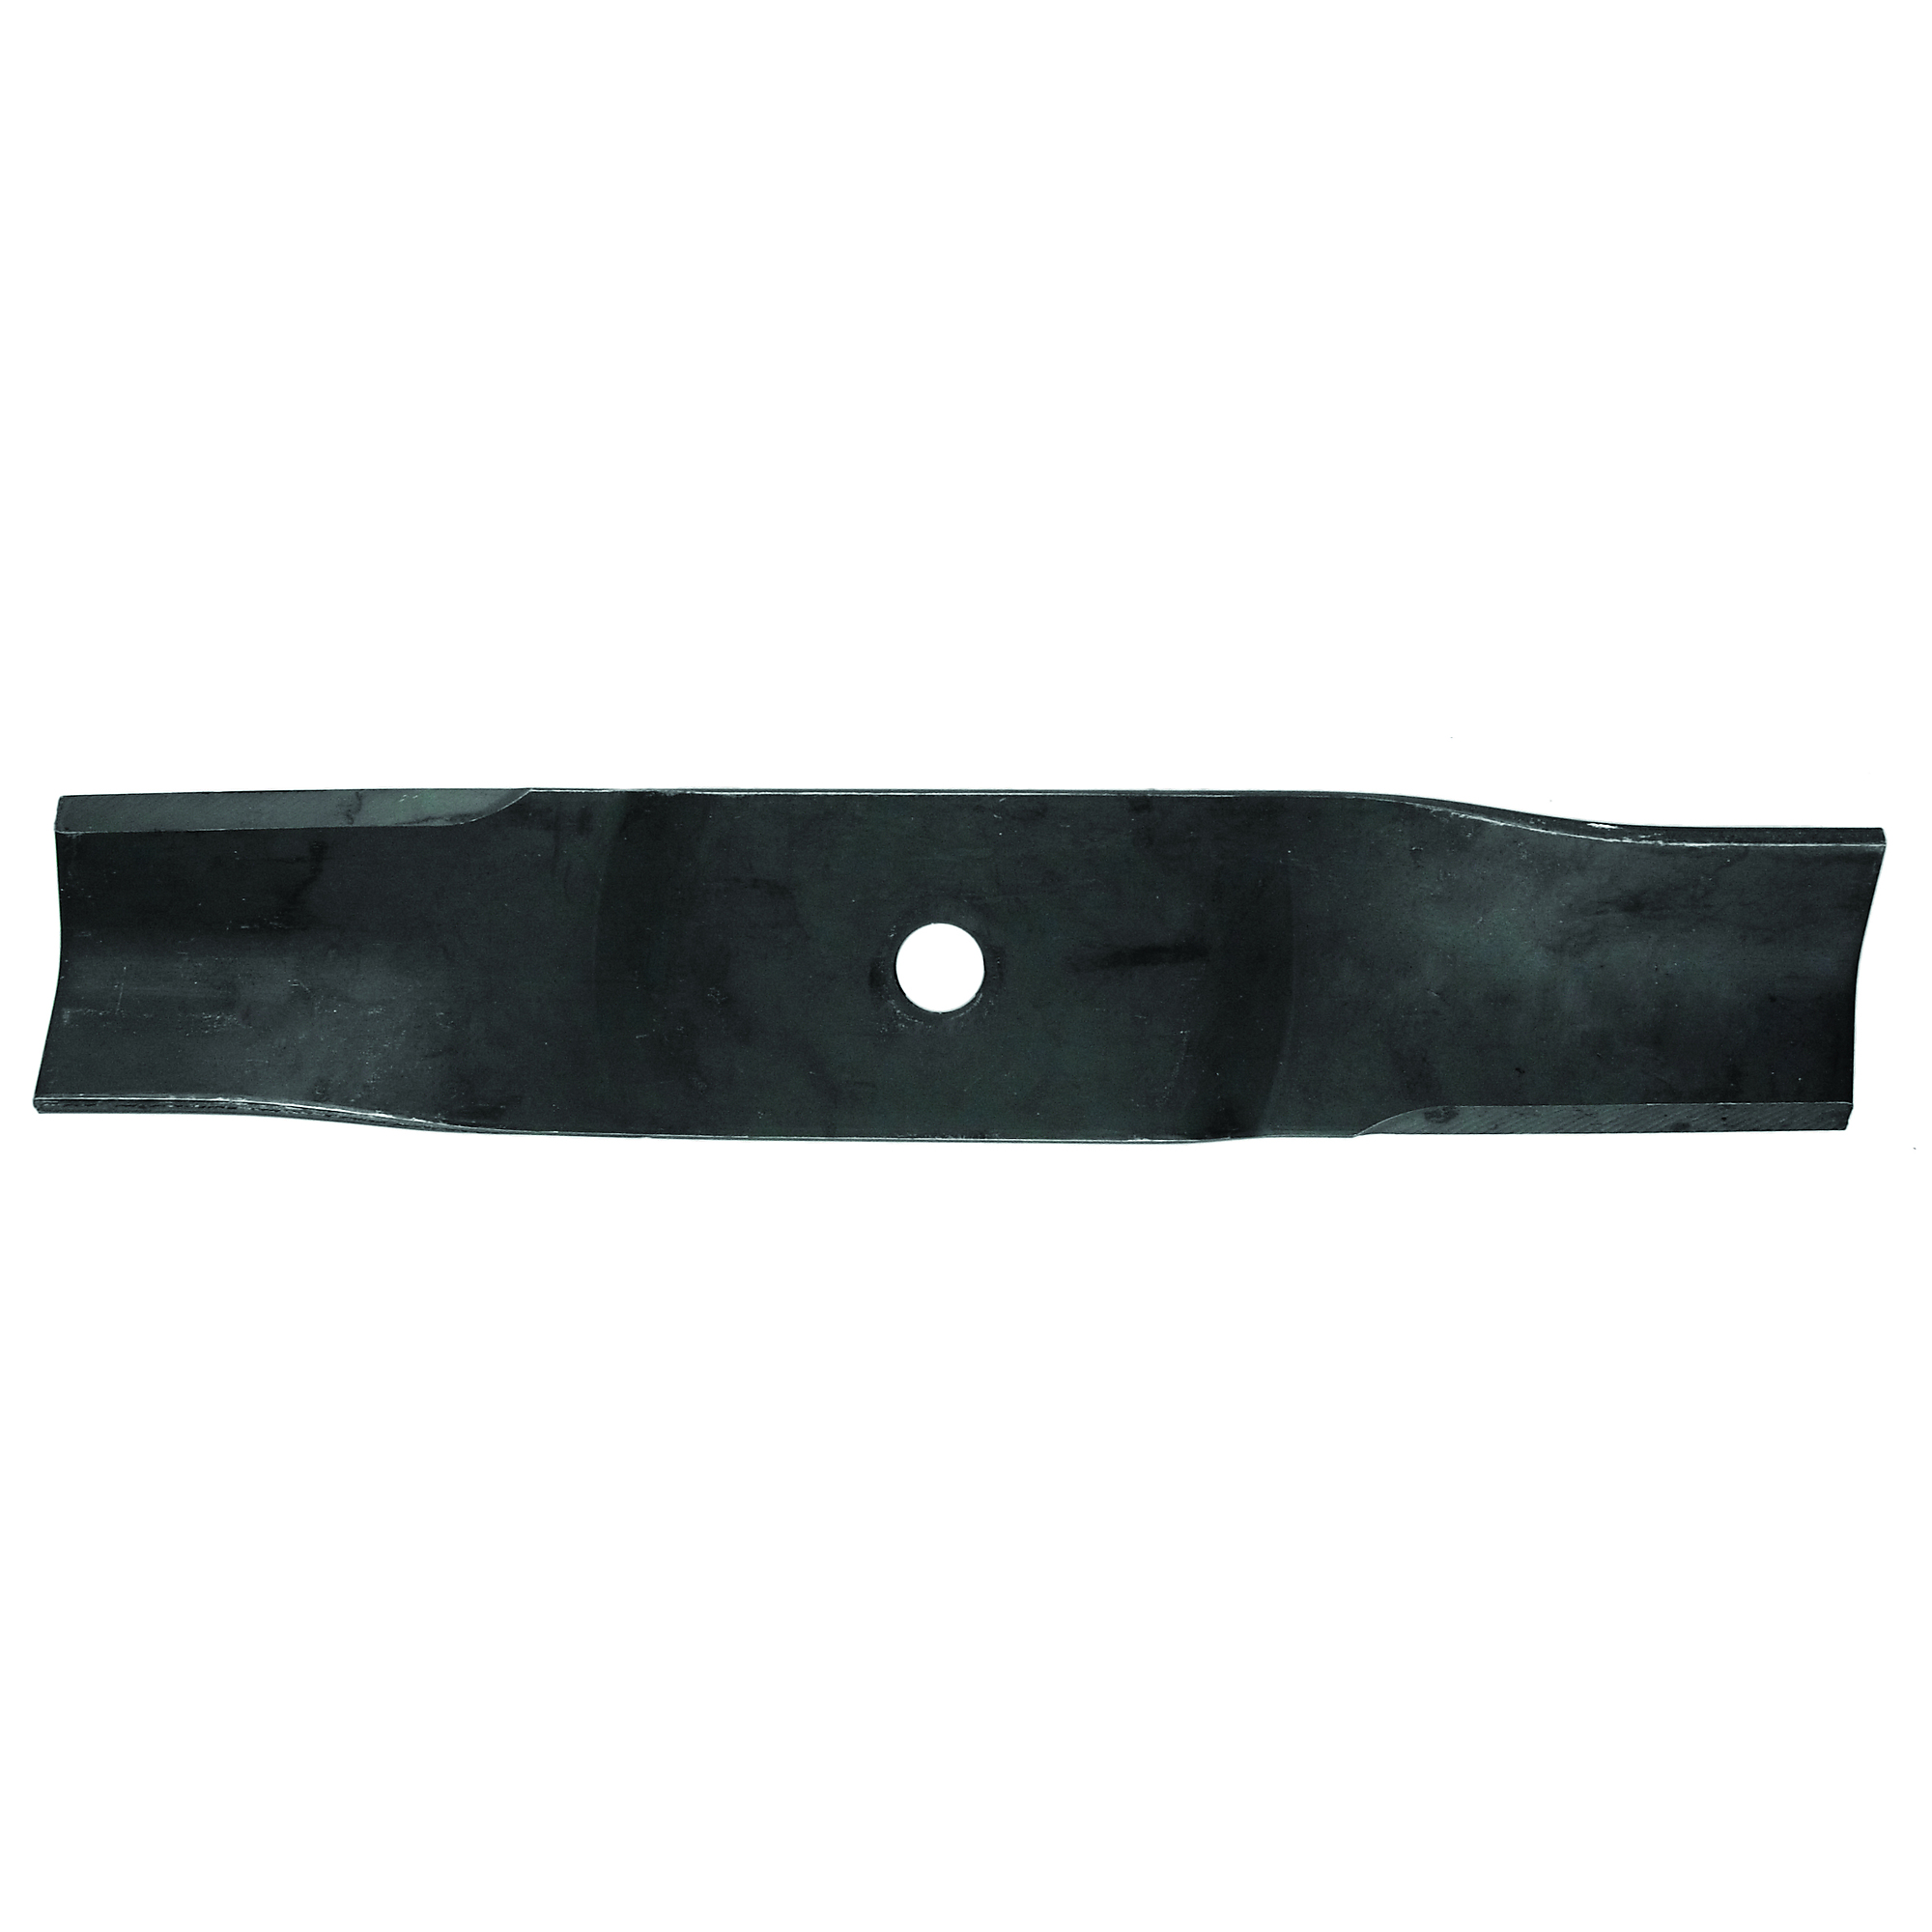 Oregon, Replacement Lawn Mower Blade, Length 15.938 in, Model 98-080